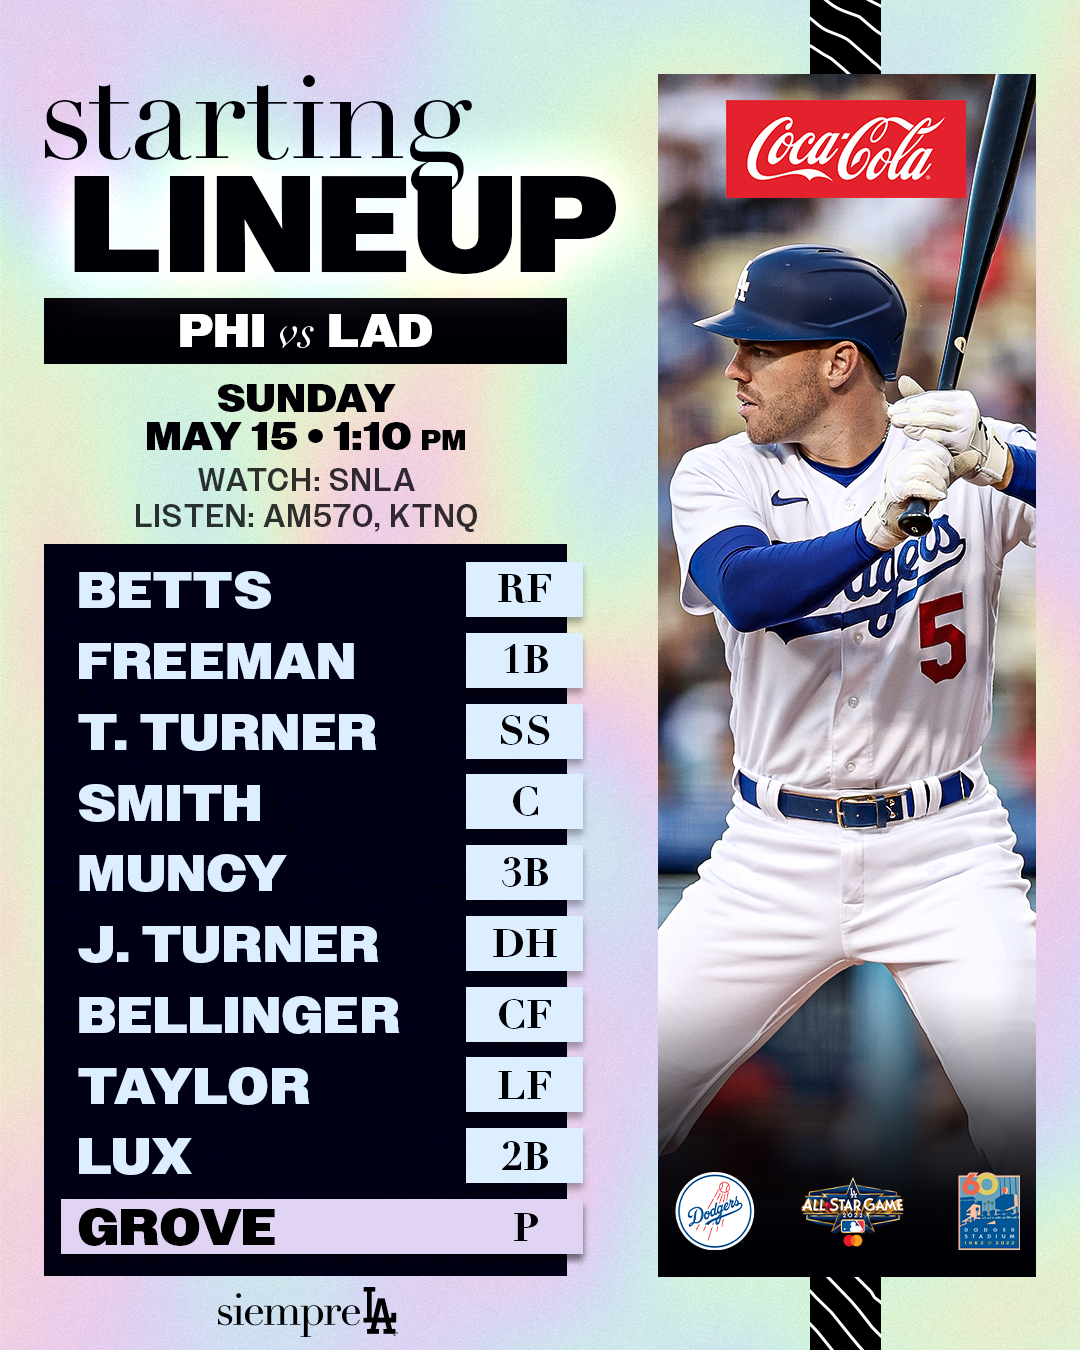 Los Angeles Dodgers on X: Tonight's lineup at Braves: #NLCS